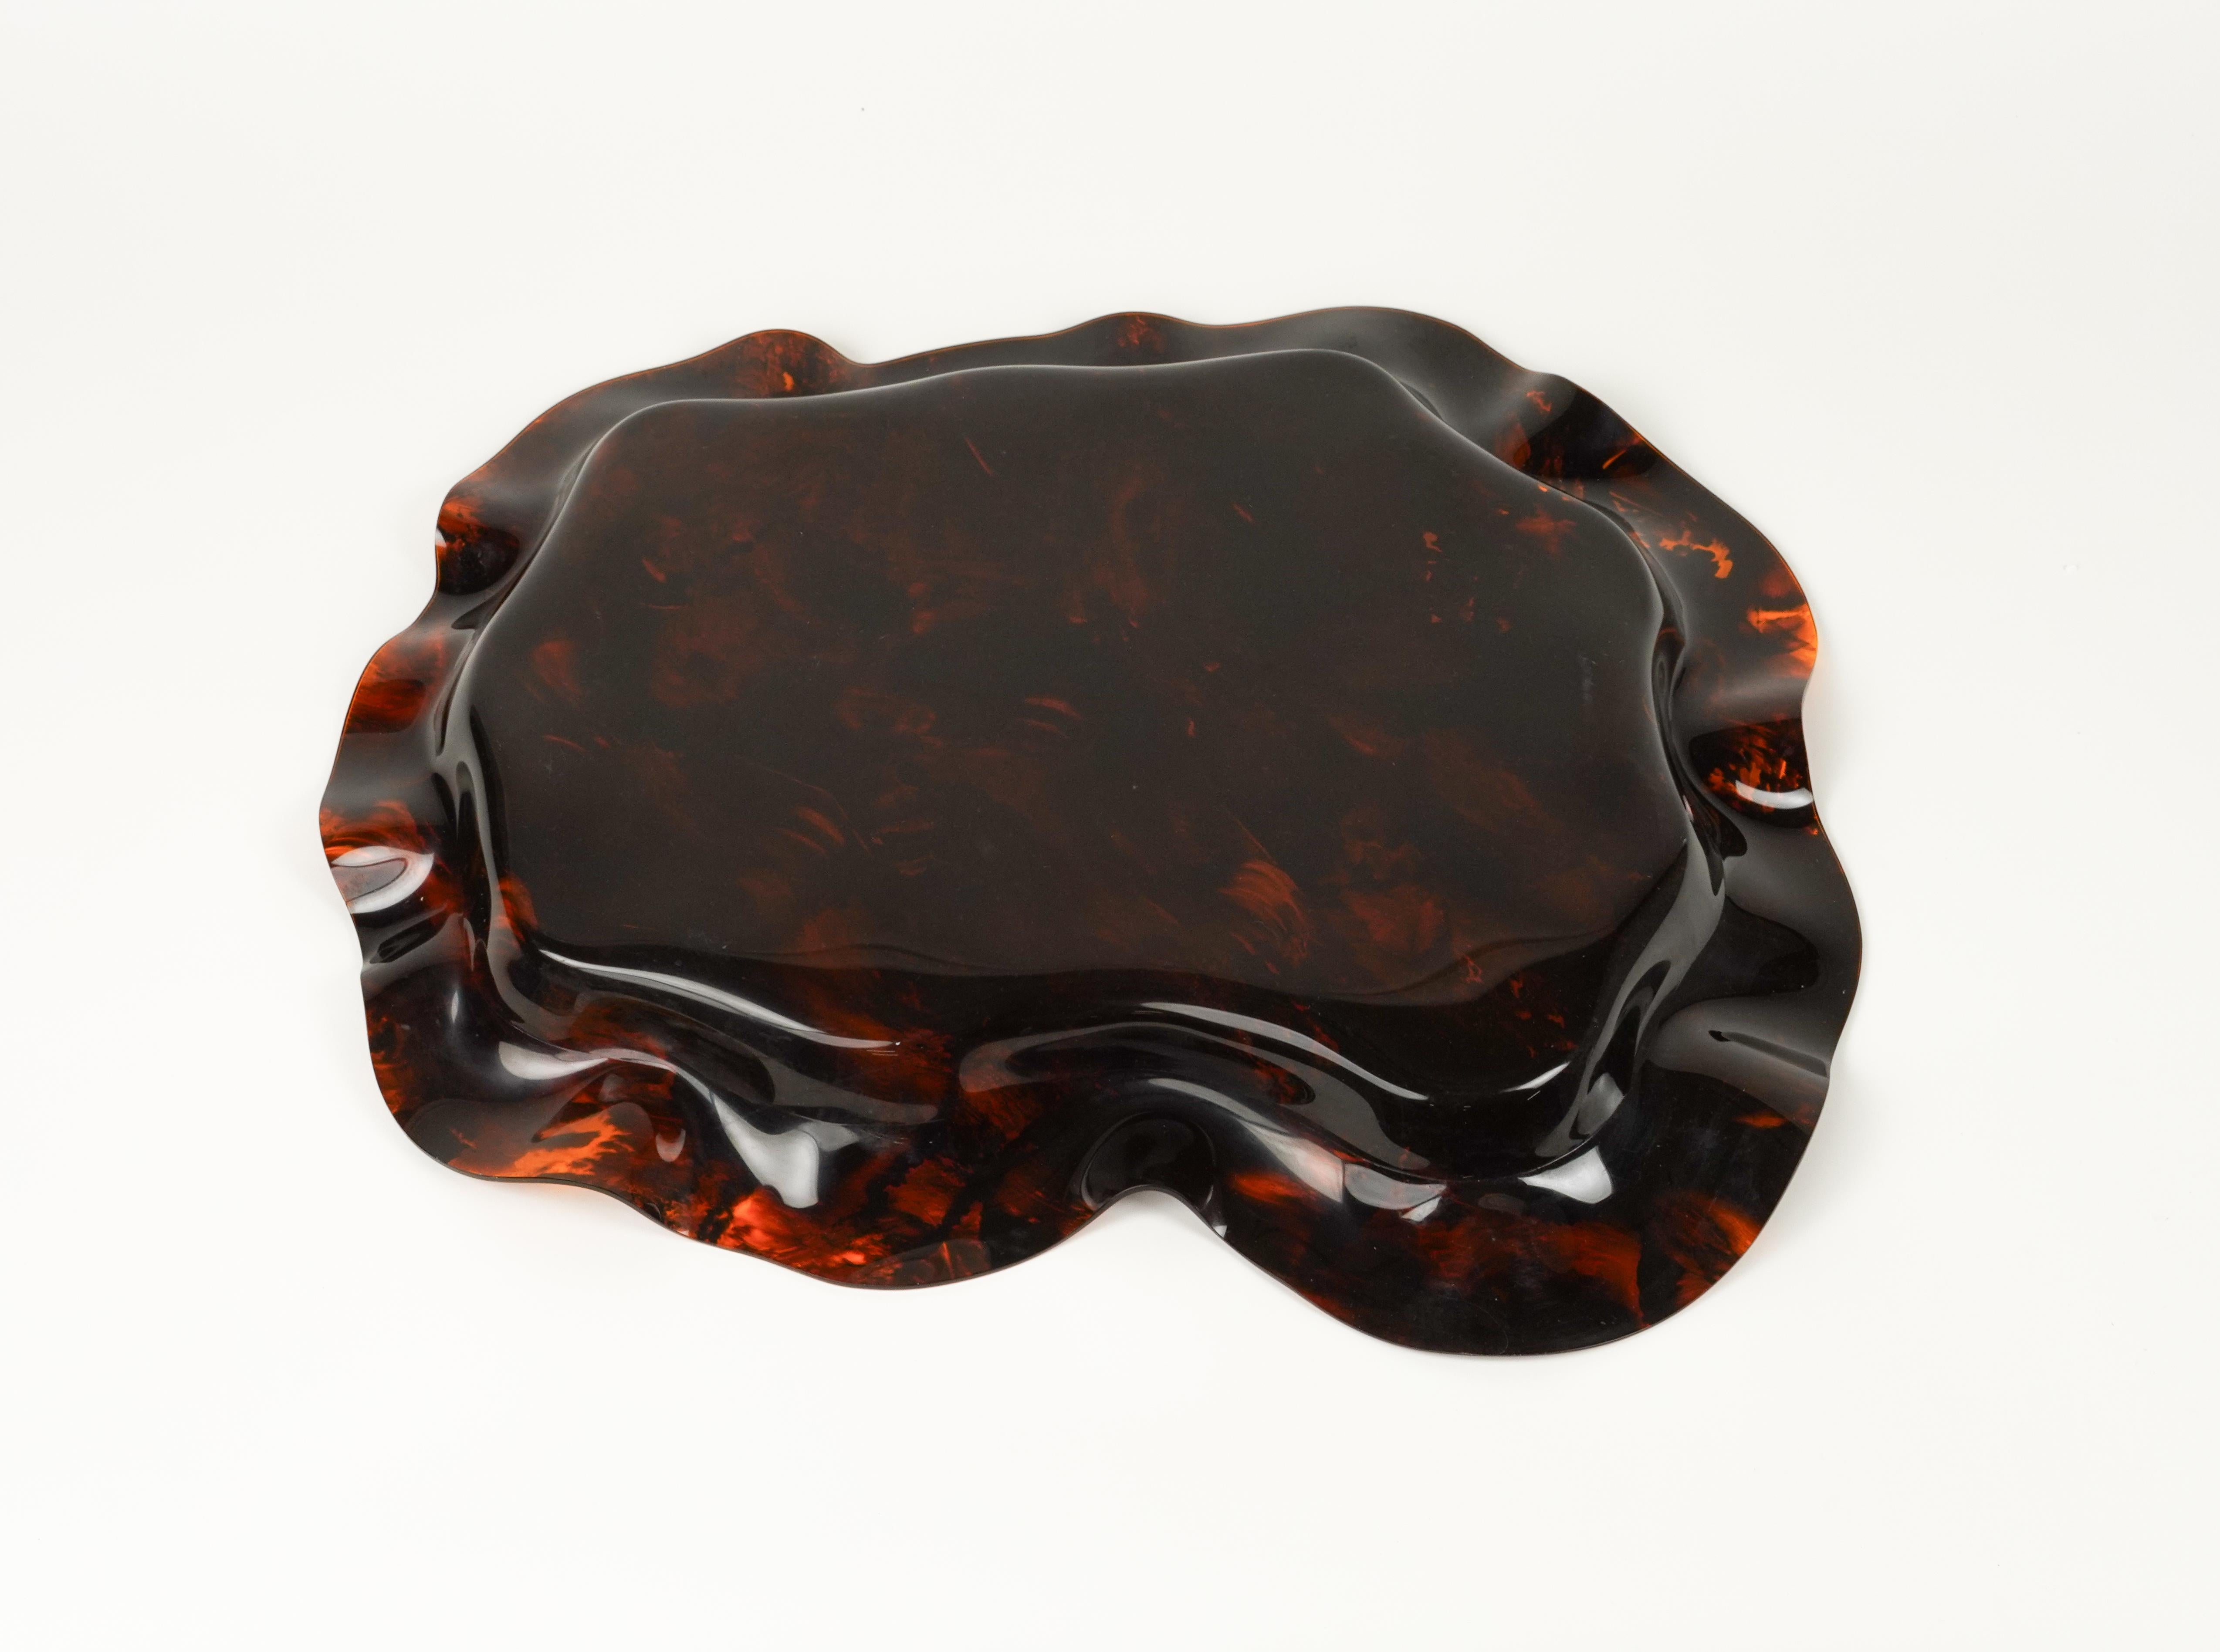 Large Serving Tray or Centerpiece Lucite Faux Tortoiseshell, Italy 1970s For Sale 12